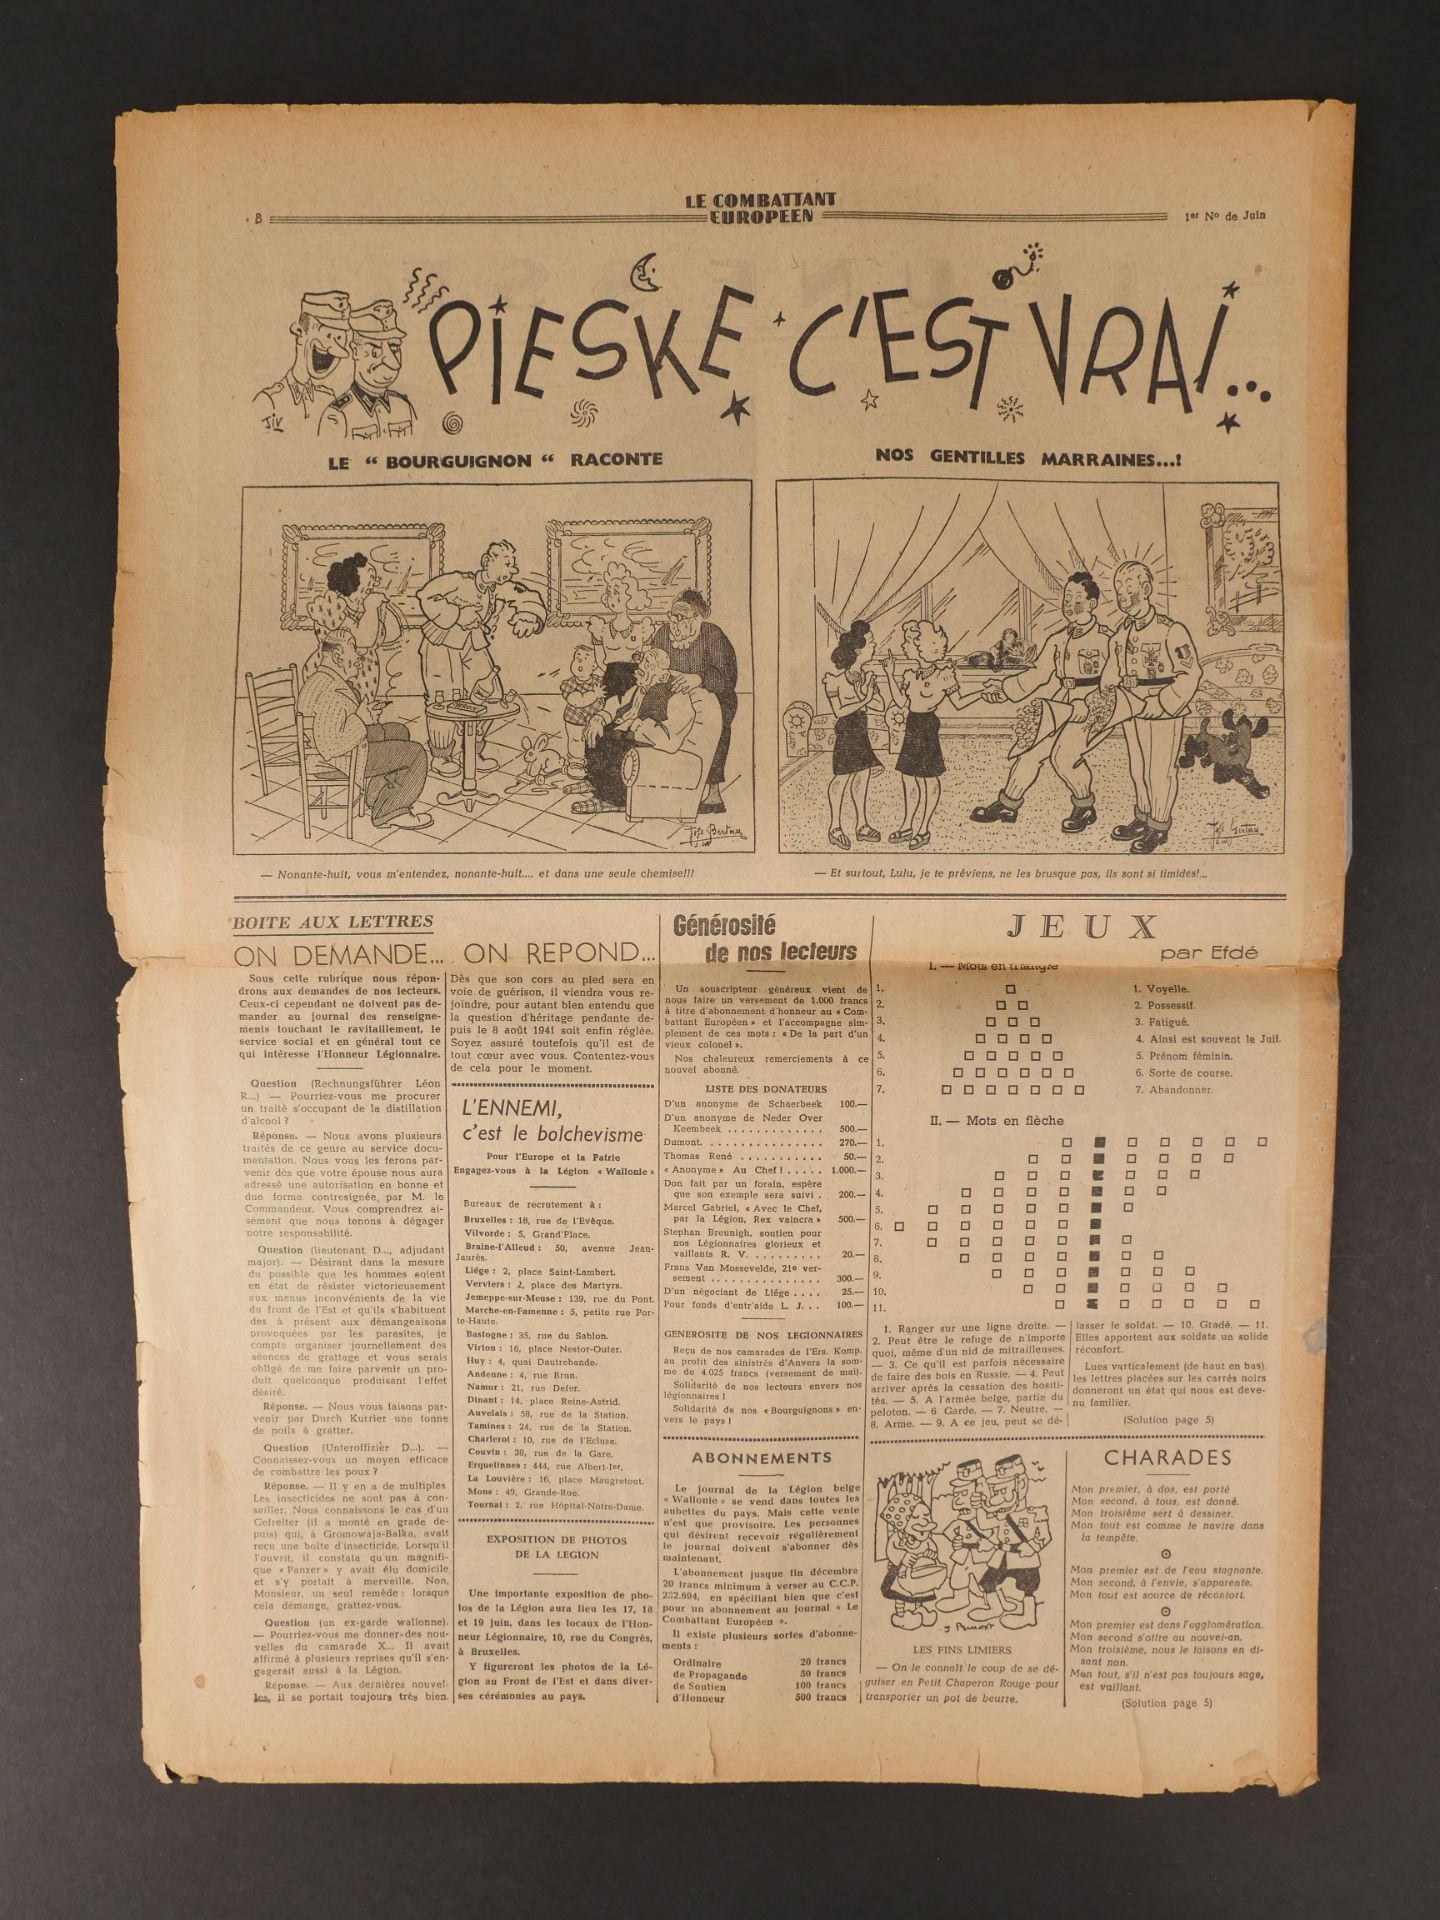 Journal le Combattant Europeen. Newspapers The European Fighter. - Image 4 of 5